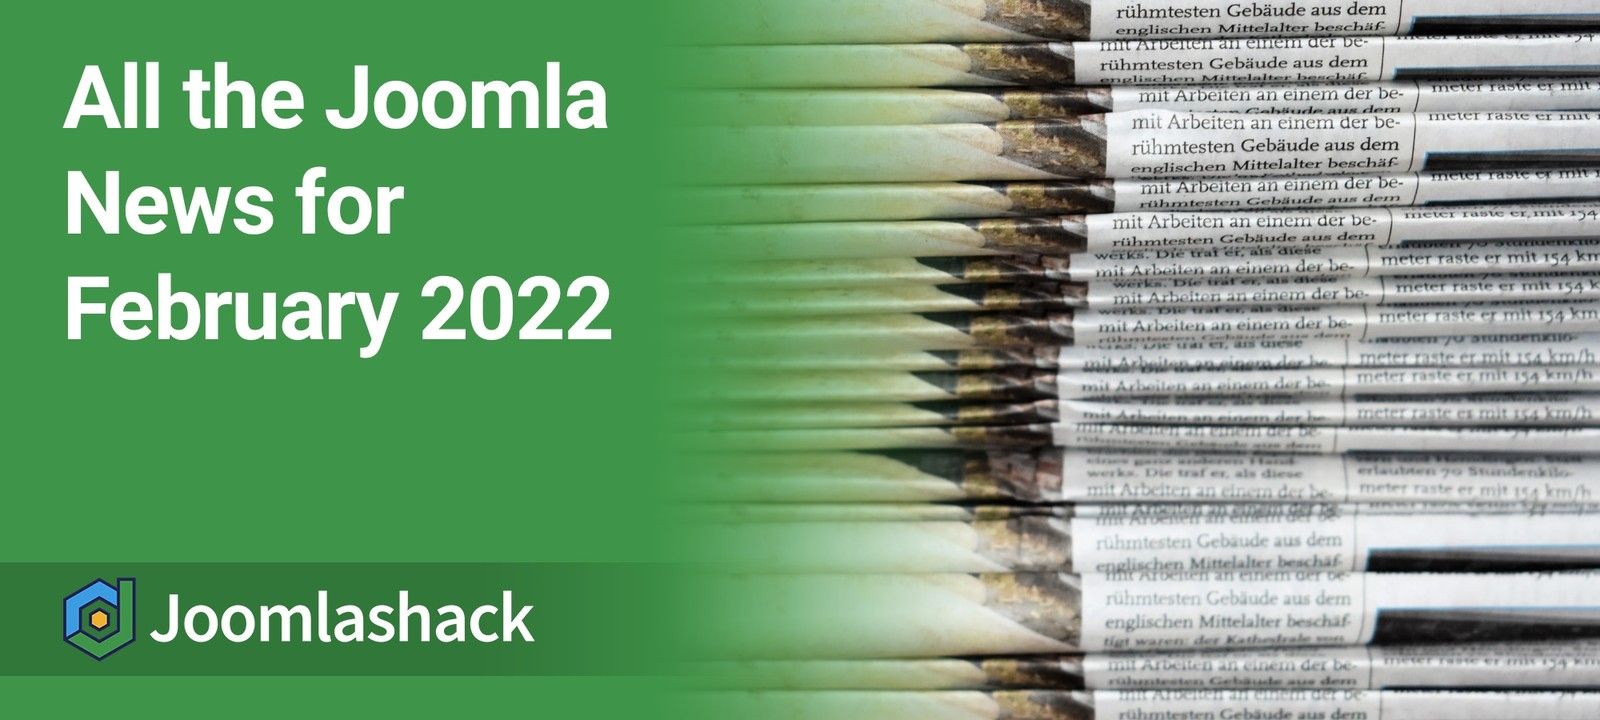  All the Joomla News for February 2022